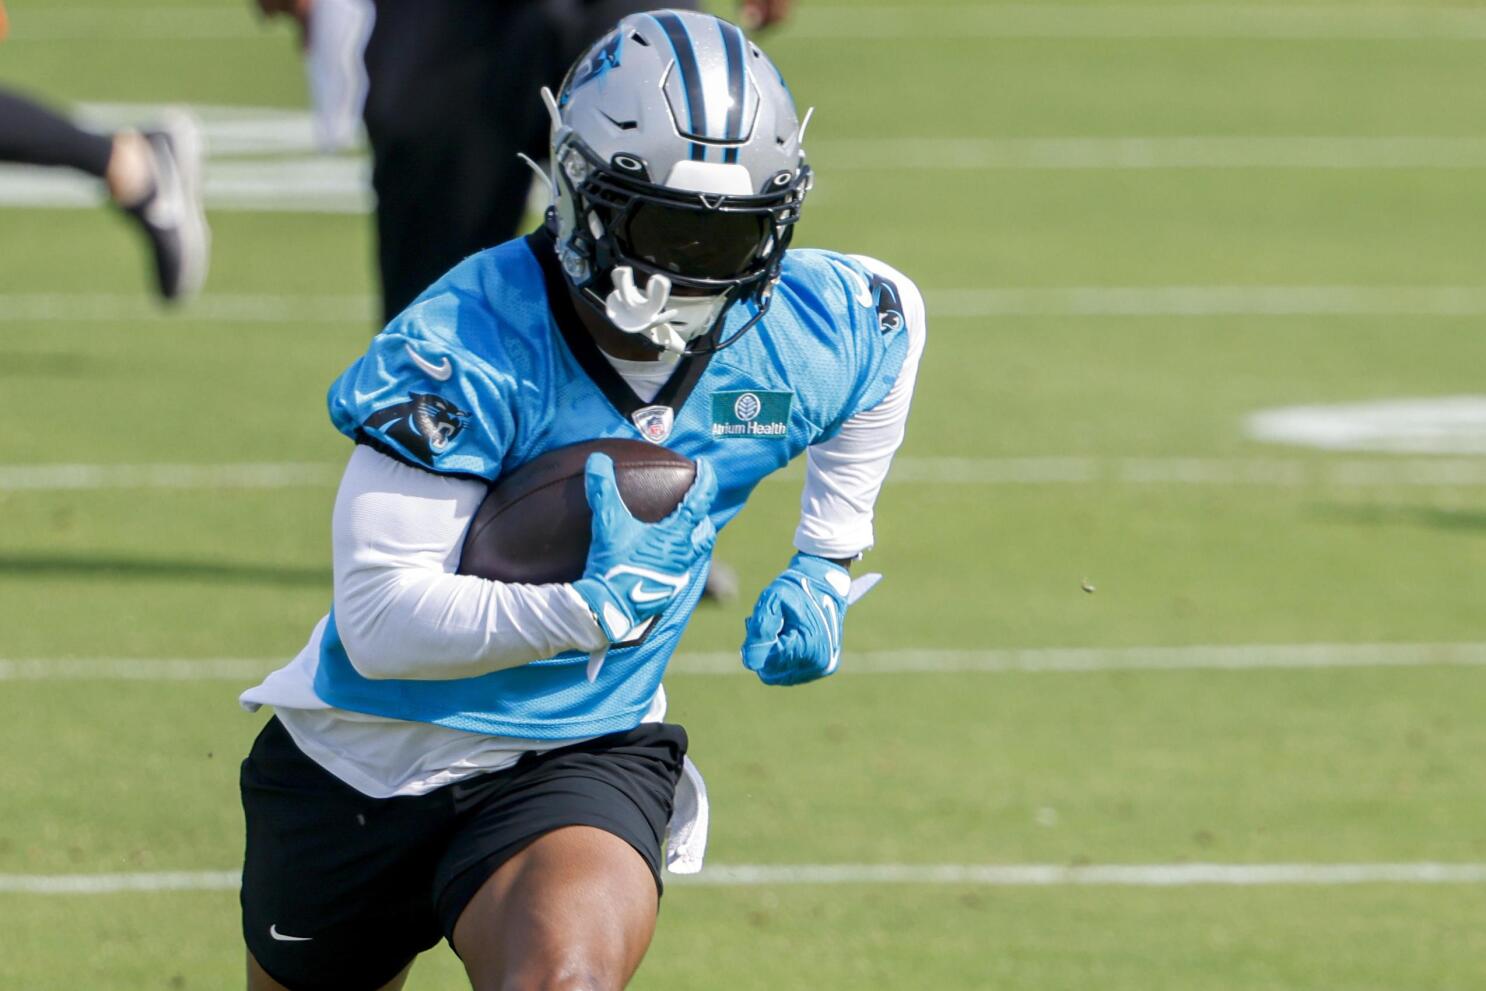 Miles Sanders relishing anticipated role as Carolina Panthers' 3